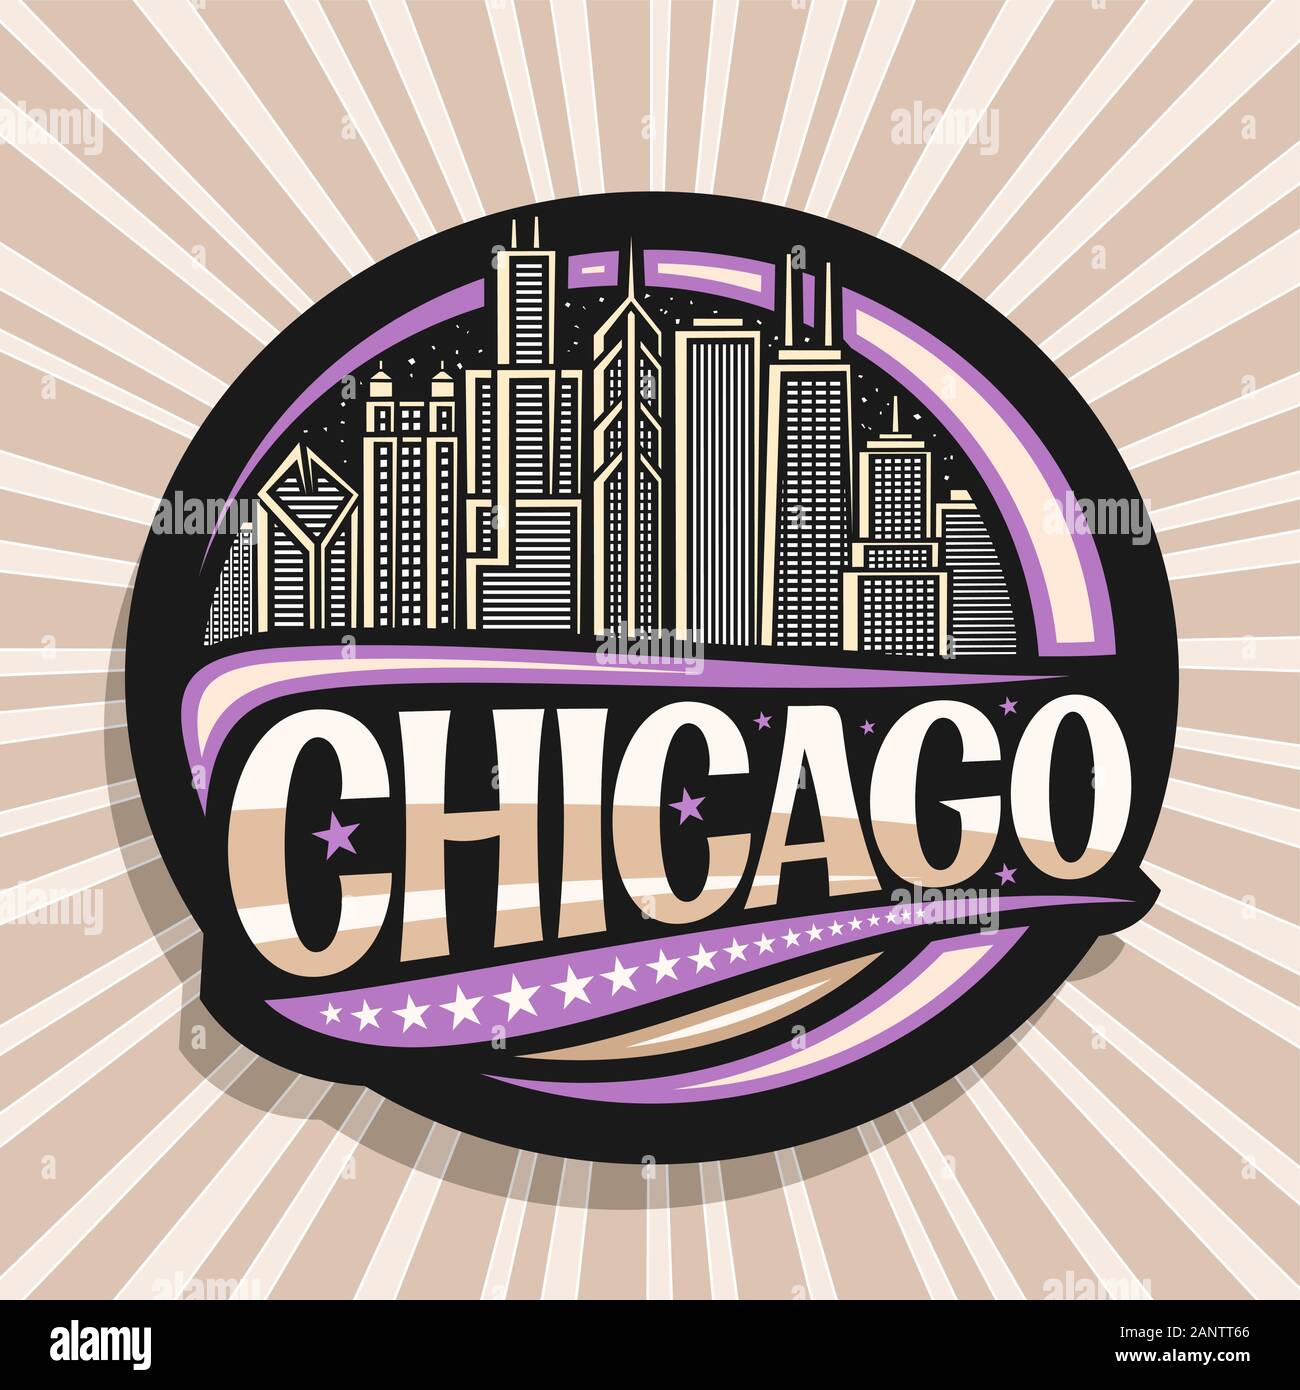 Vector logo for Chicago, dark decorative round badge with draw illustration of modern twilight chicago cityscape, tourist fridge magnet with original Stock Vector